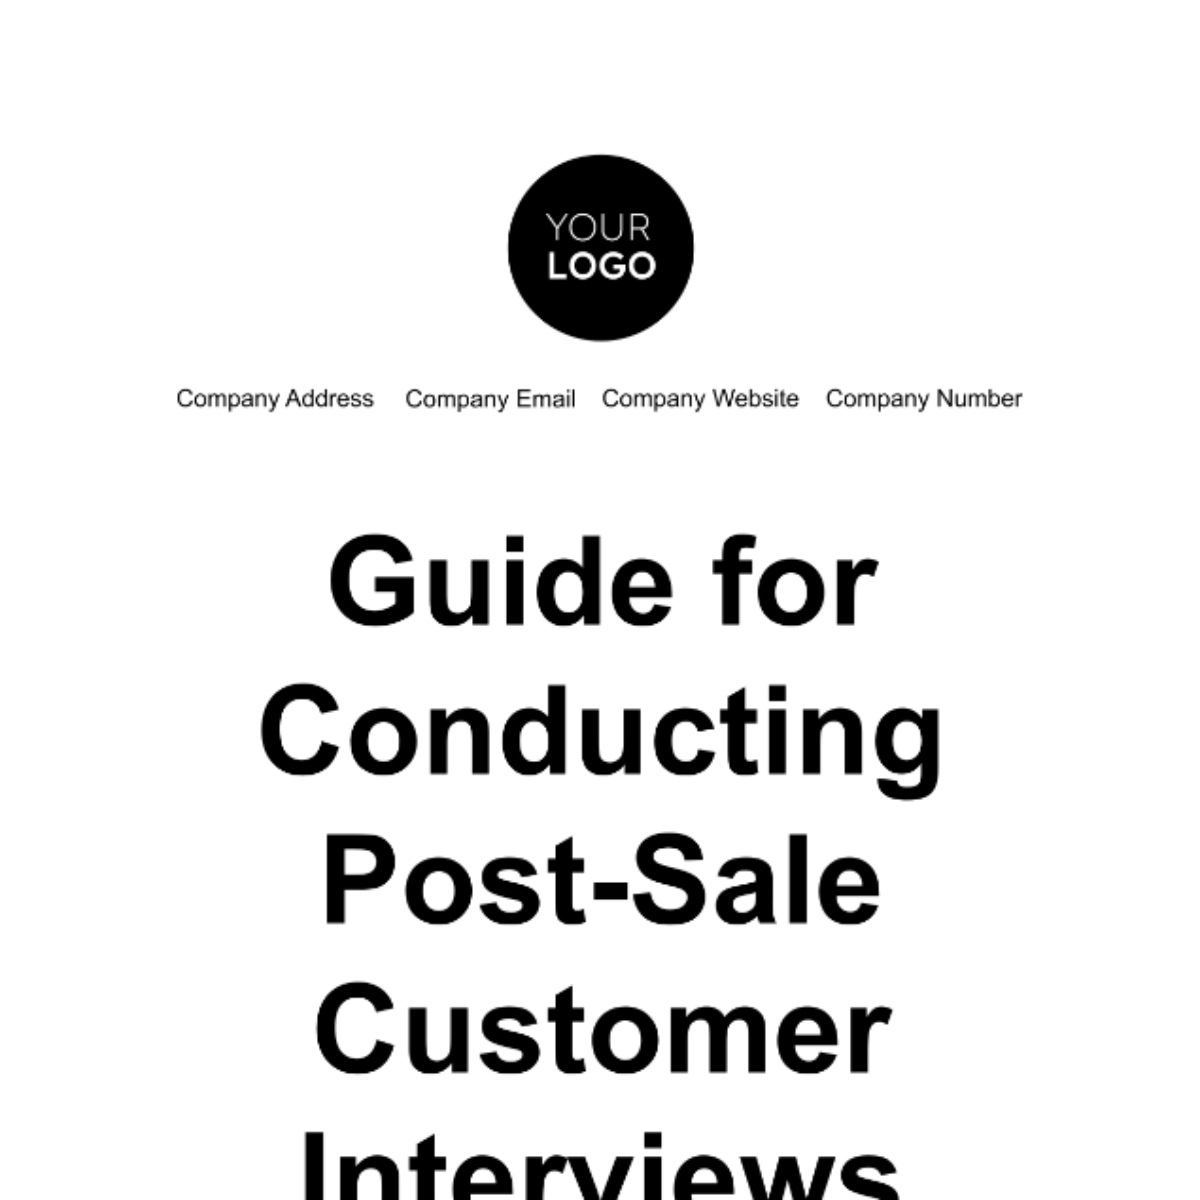 Free Guide for Conducting Post-Sale Customer Interviews Template